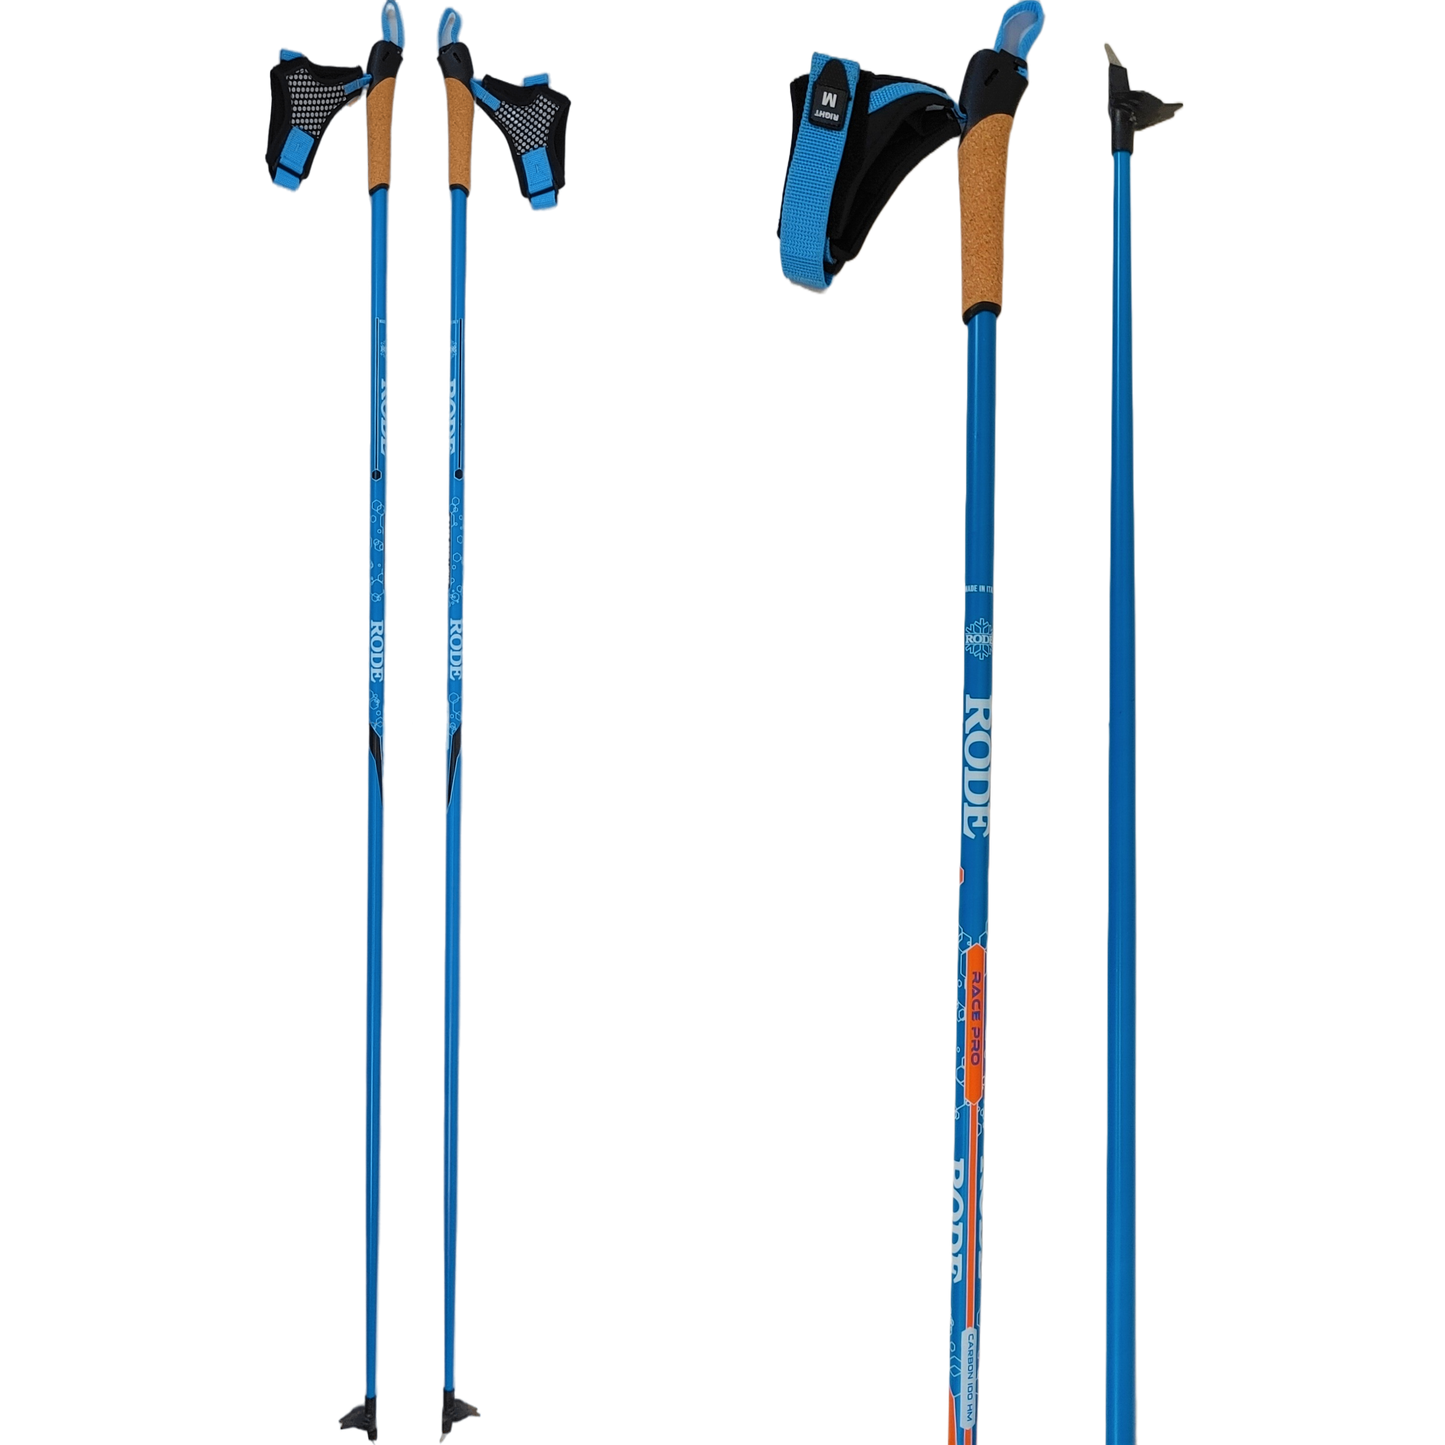 A product picture of the Rode Race Pro Poles